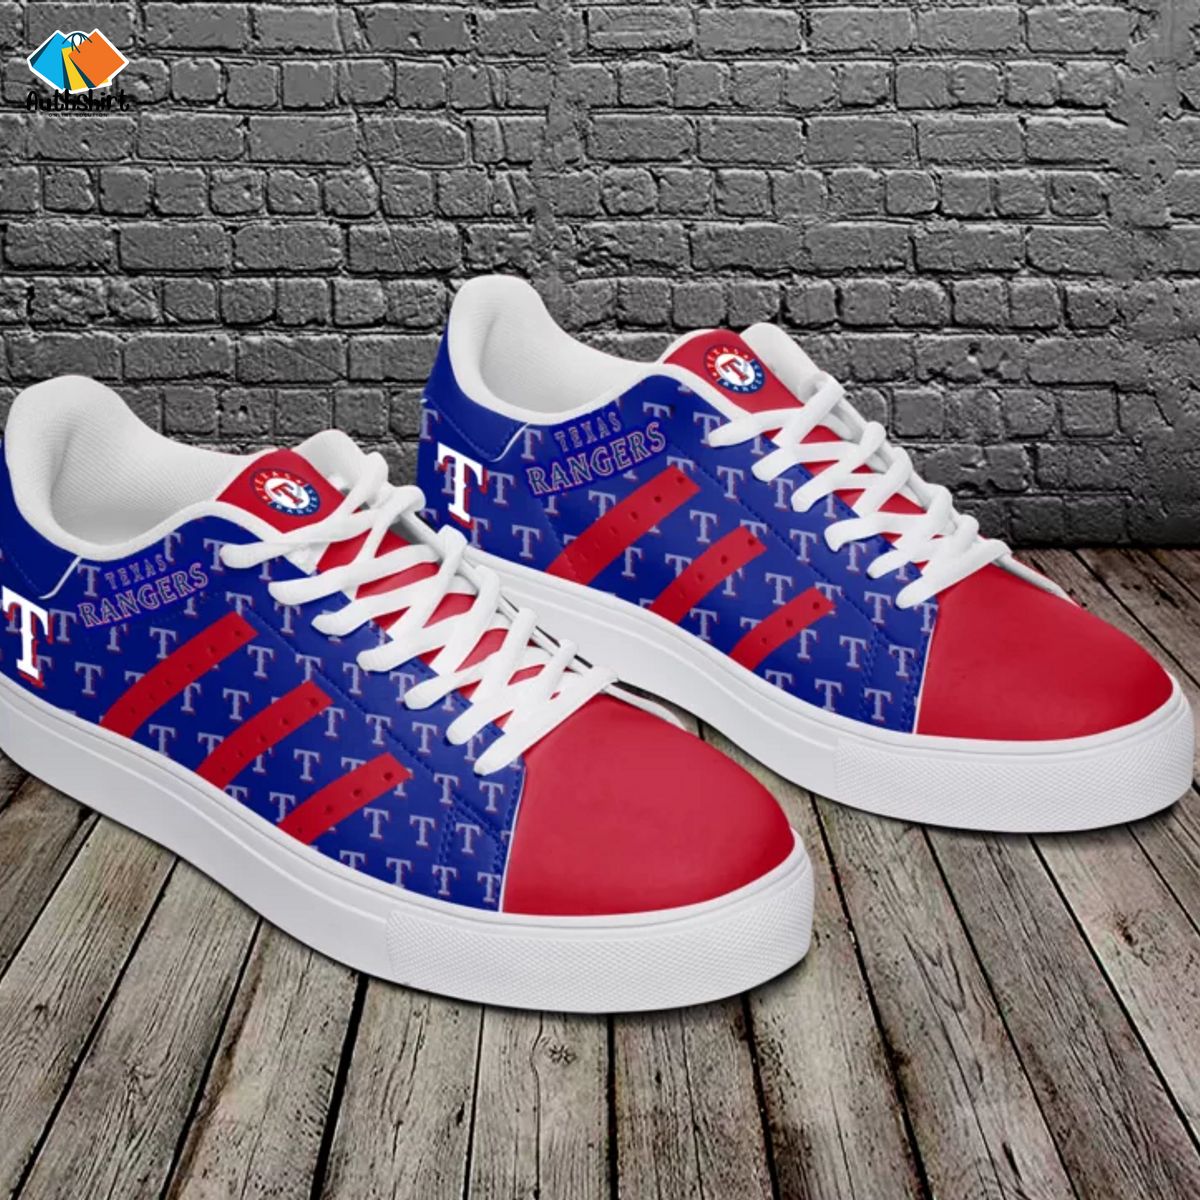 Texas Rangers NHL Stripes Styles Stan Smith Shoes Ver 1